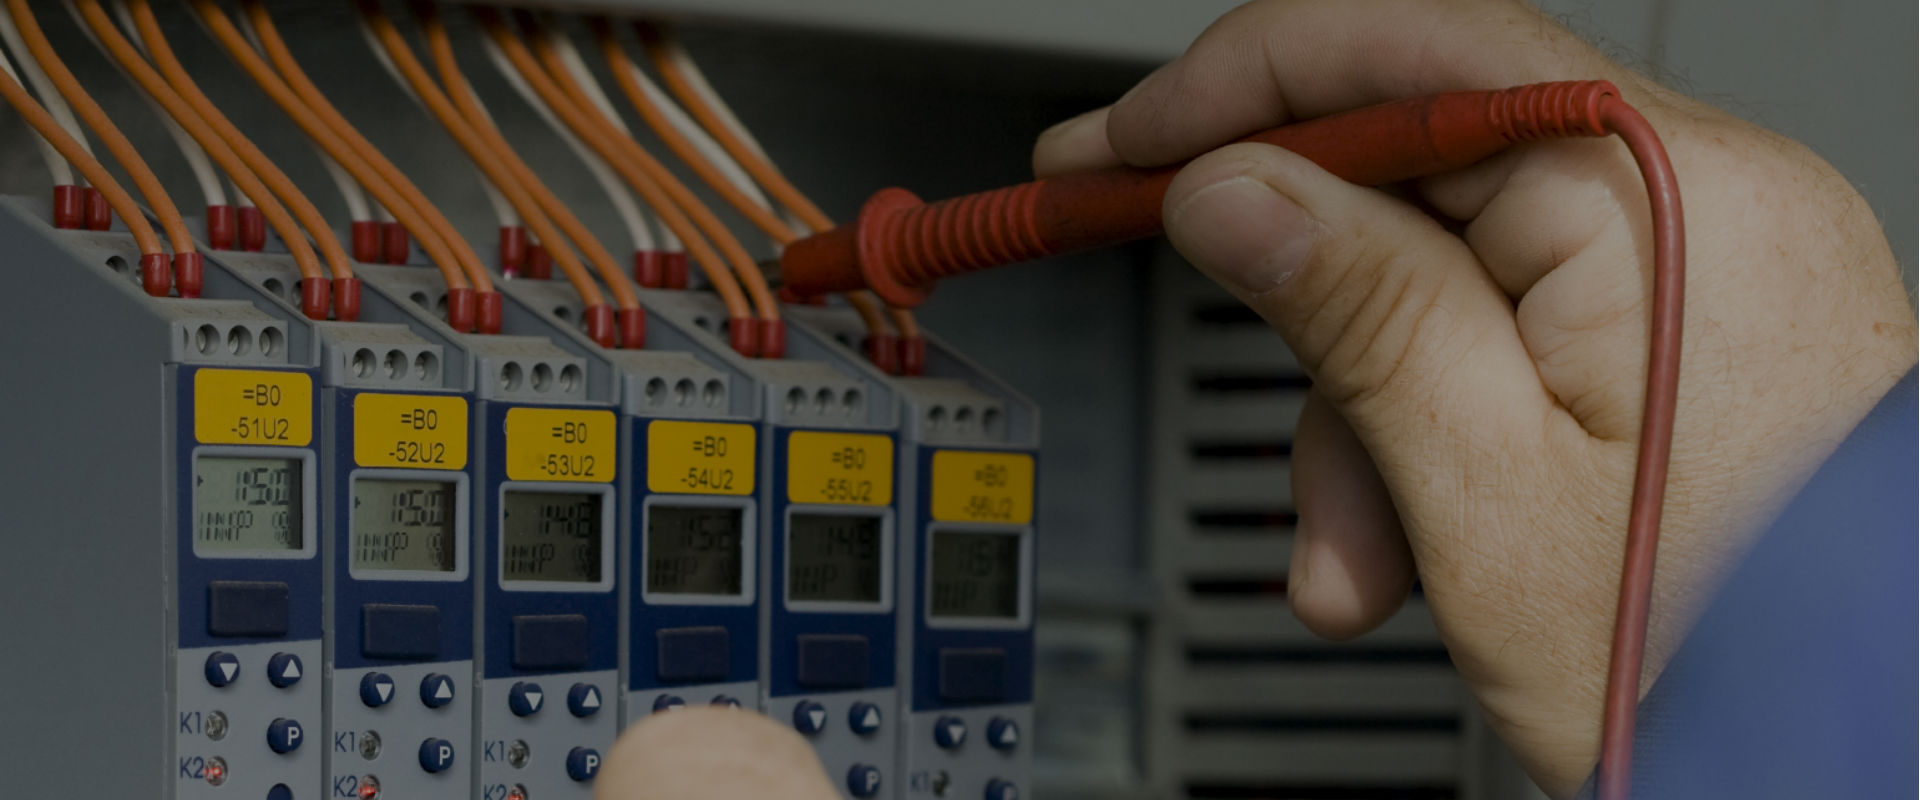 Need a reliable electrician for your home or business?